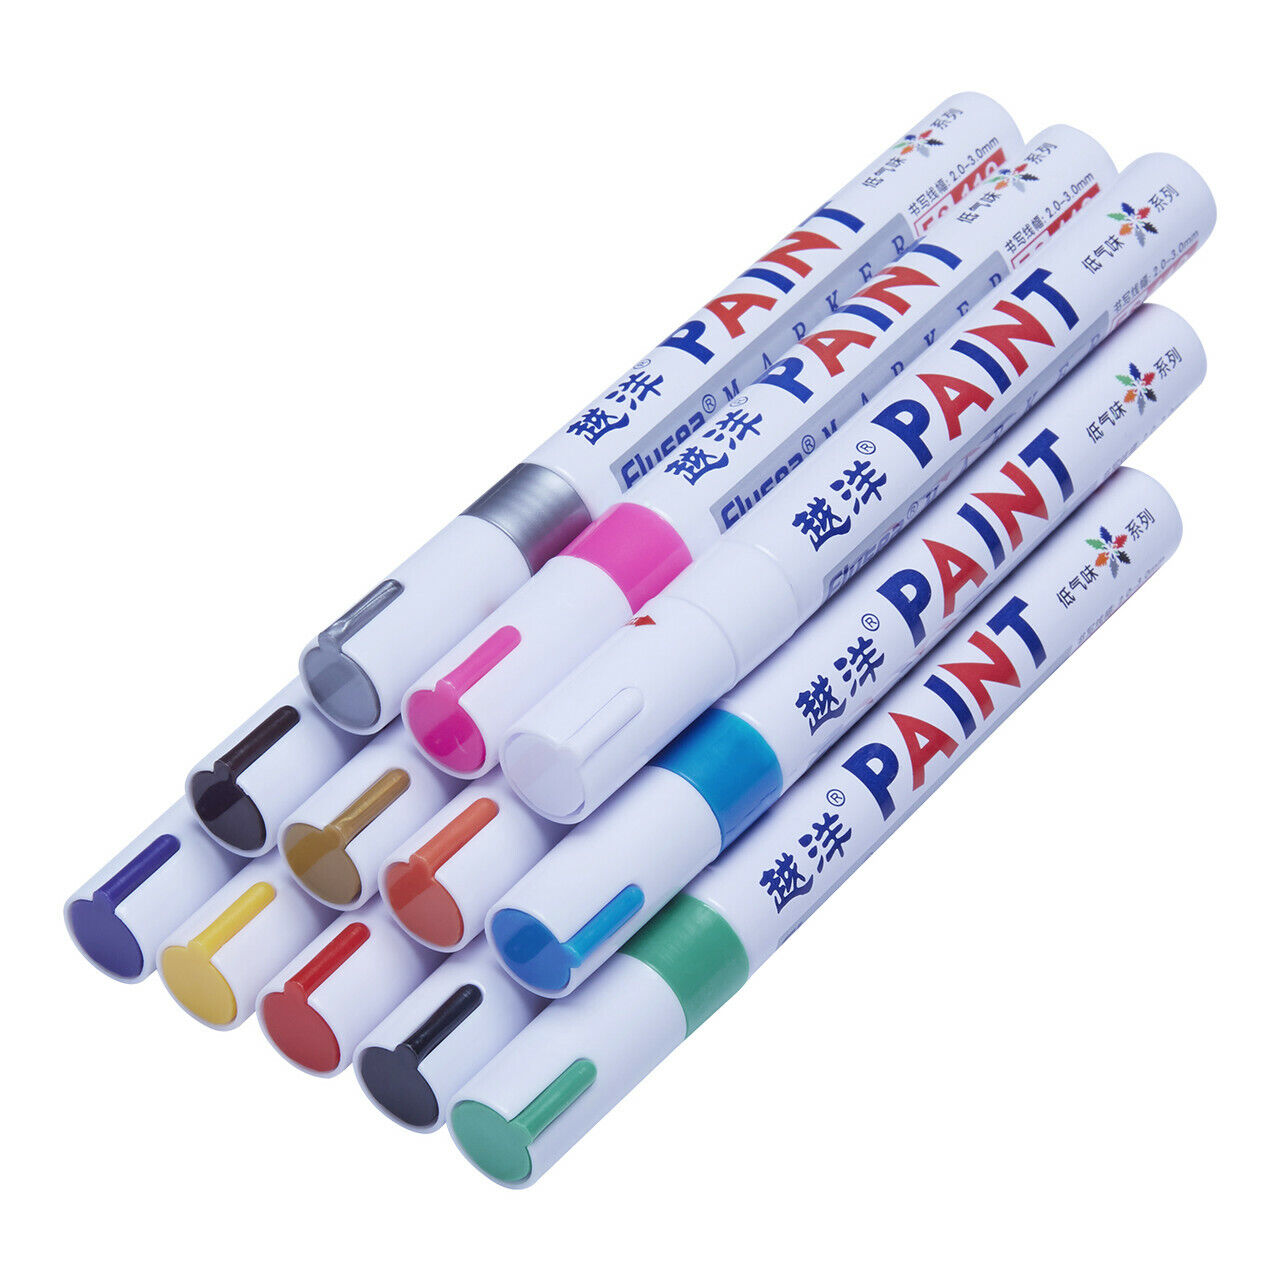 12pcs Waterproof Permanent Paint Marker Pen for Car Tyre Tire Tread Rubber Metal Unbranded Does Not Apply - фотография #11